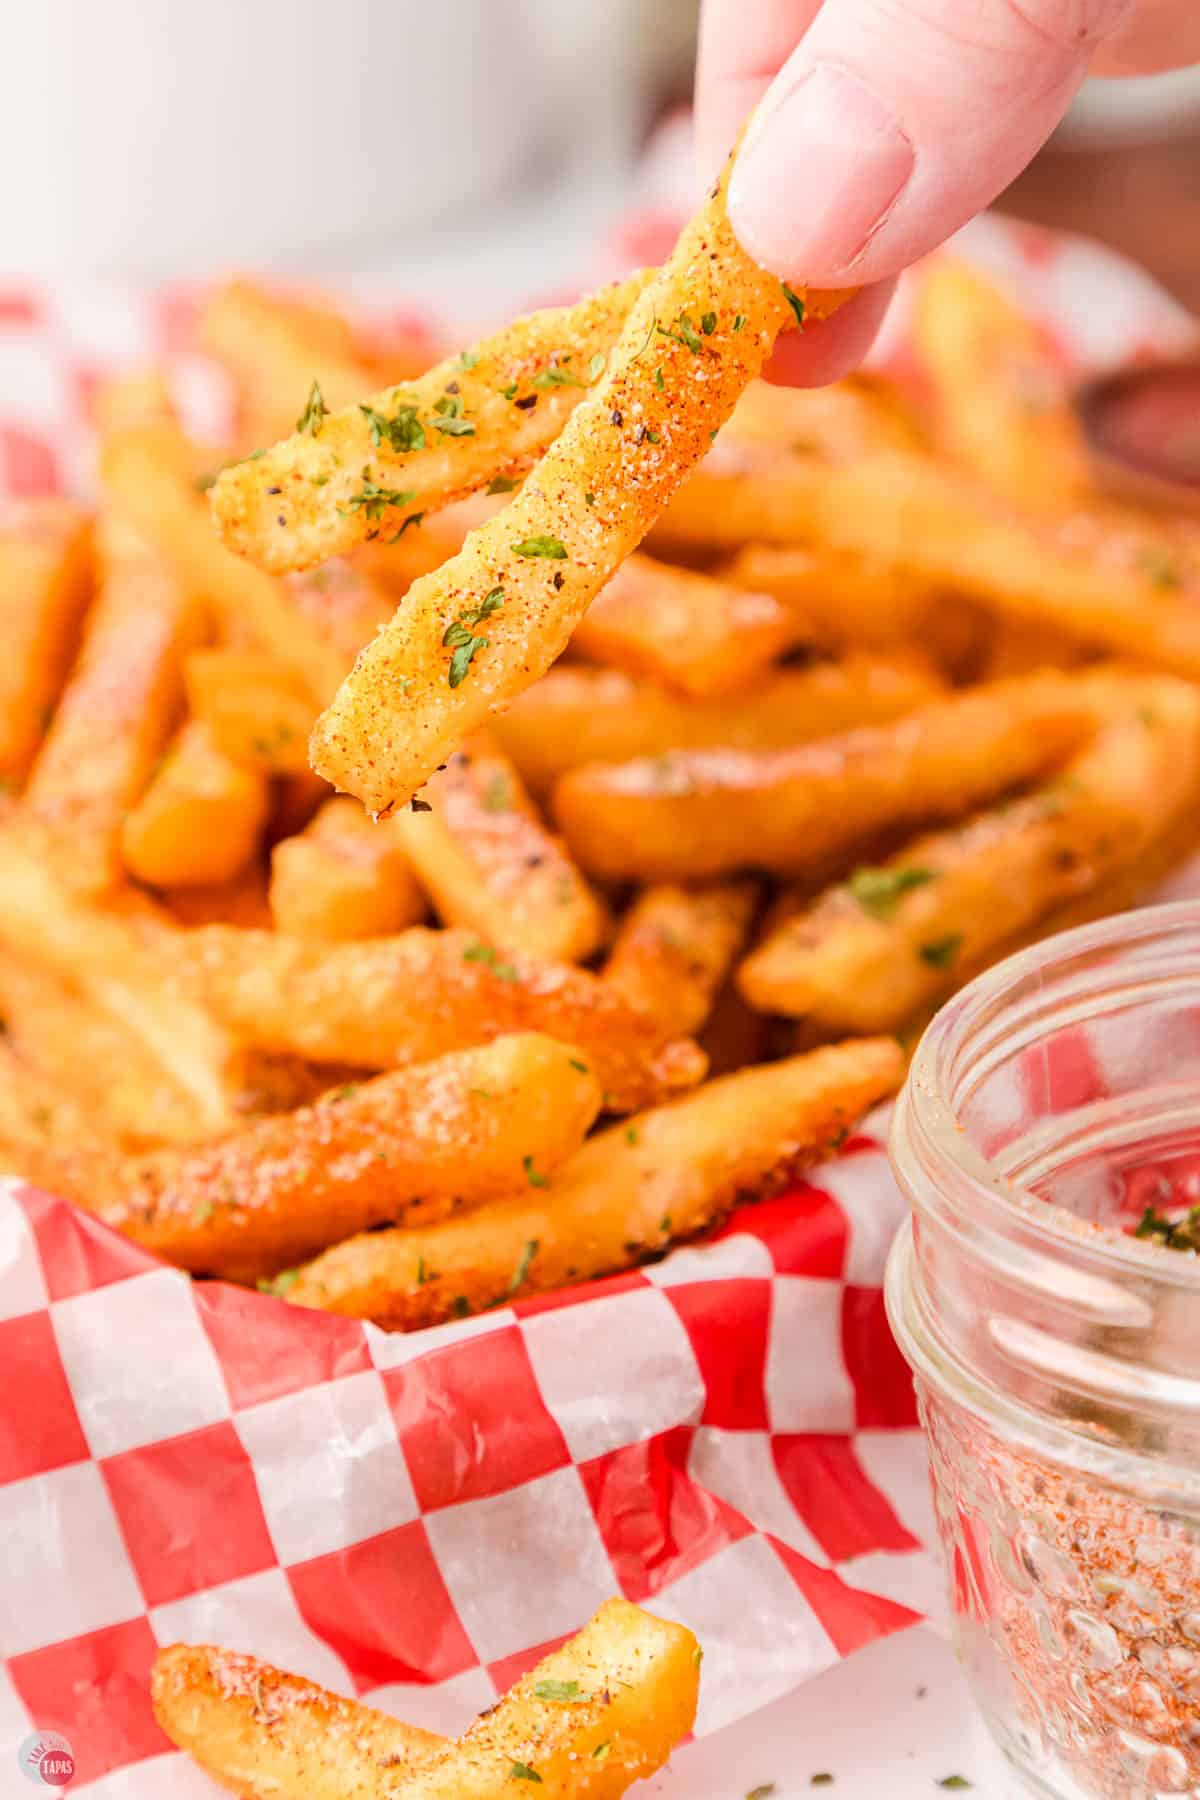 keep this french fry seasoning in a cool dry place out of direct sunlight